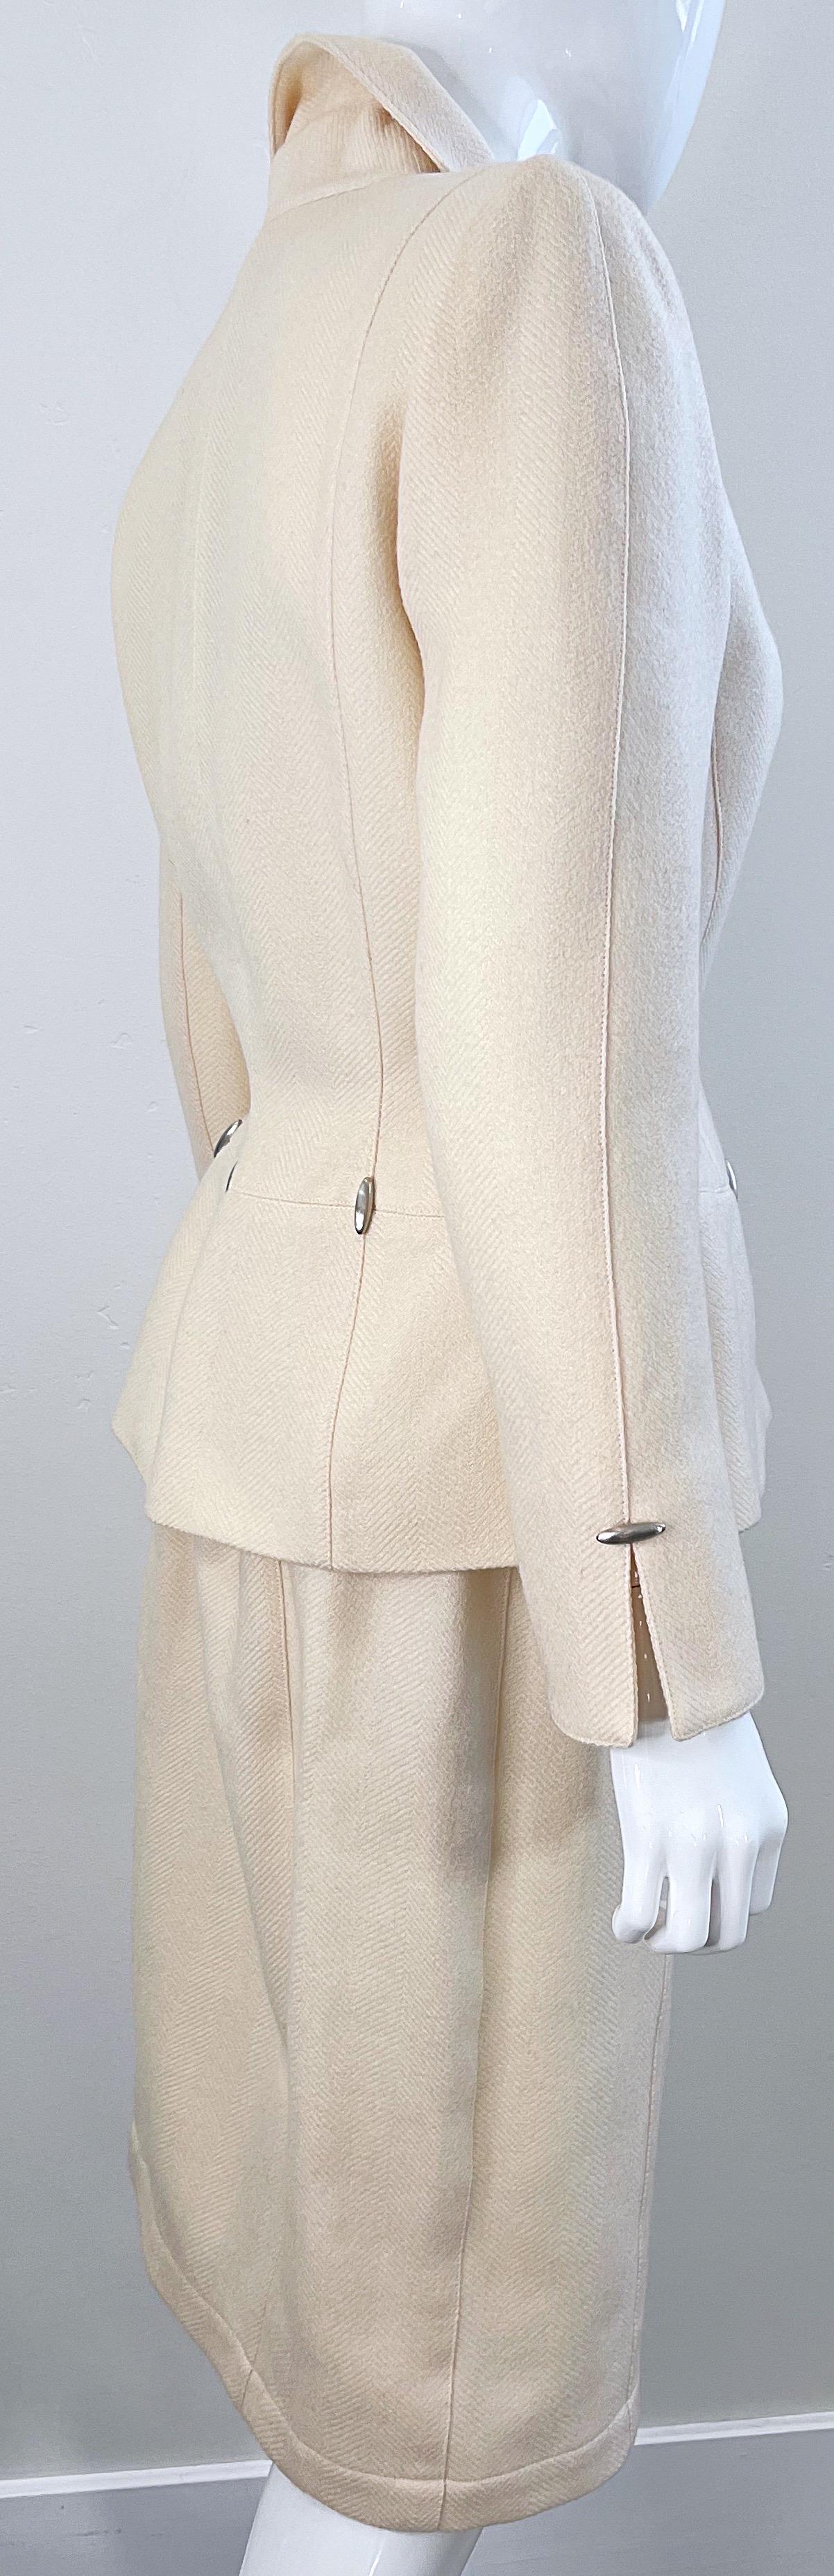 Vintage Thierry Mugler F/W 1989 Ivory Size 4 / 6 Wool Silver Bullet Skirt Suit  For Sale 2